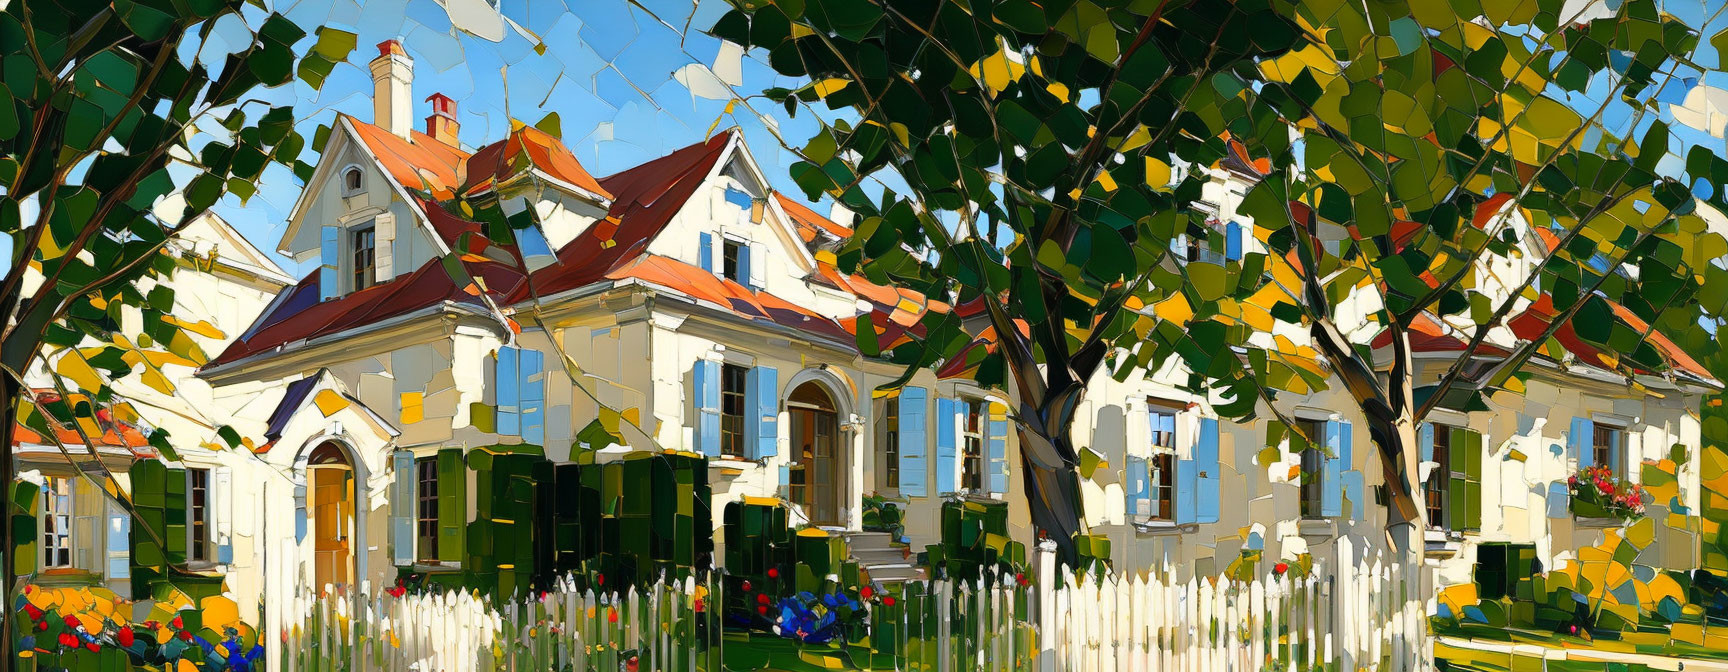 Impressionist-style painting of quaint houses and lush greenery